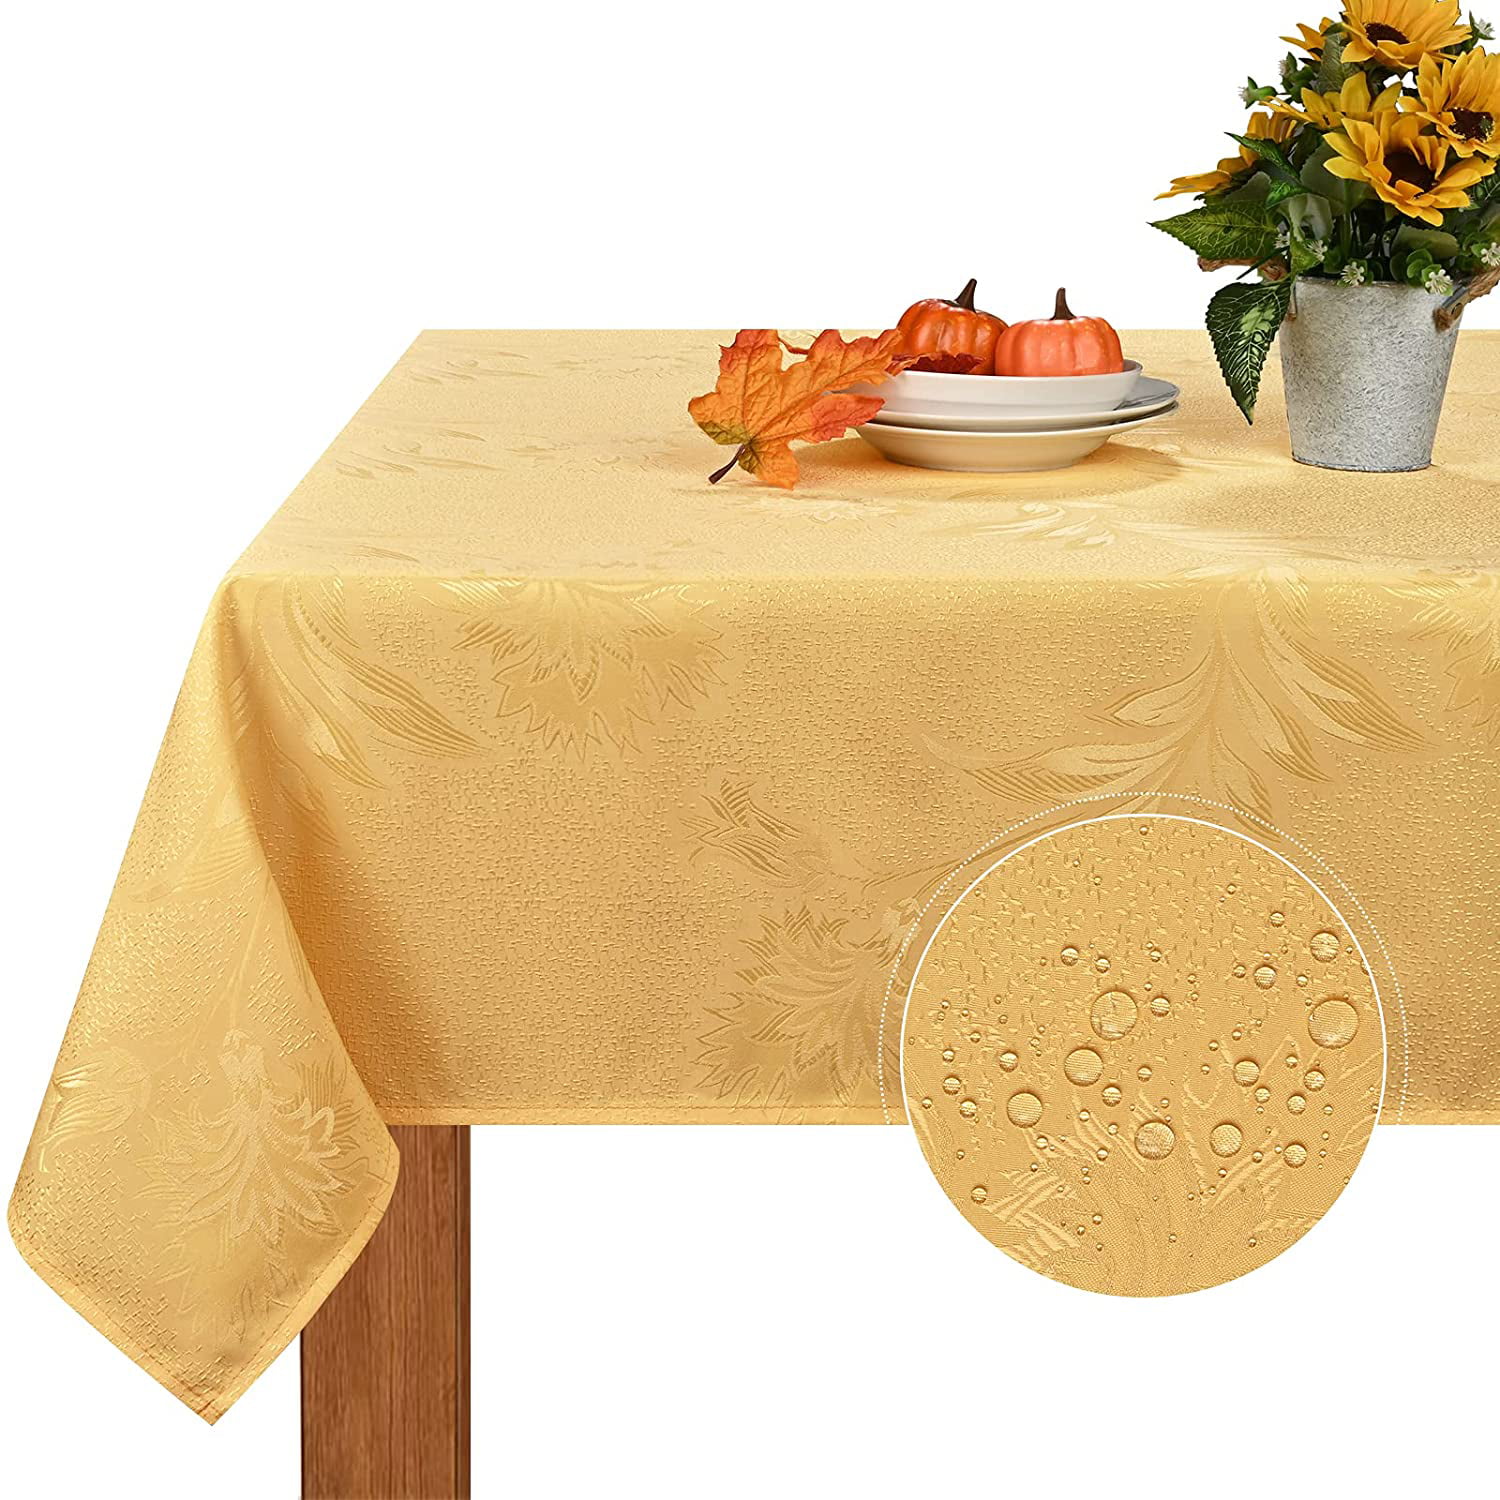 ALAZA Colorful Thanksgiving Autumn Leafs Thanksgiving Tablecloth,Washable Tablecloth,60 x 120 Inch Oblong/Rectangle Tablecloth for Family Dinner,Indoor or Outdoor Parties Etc